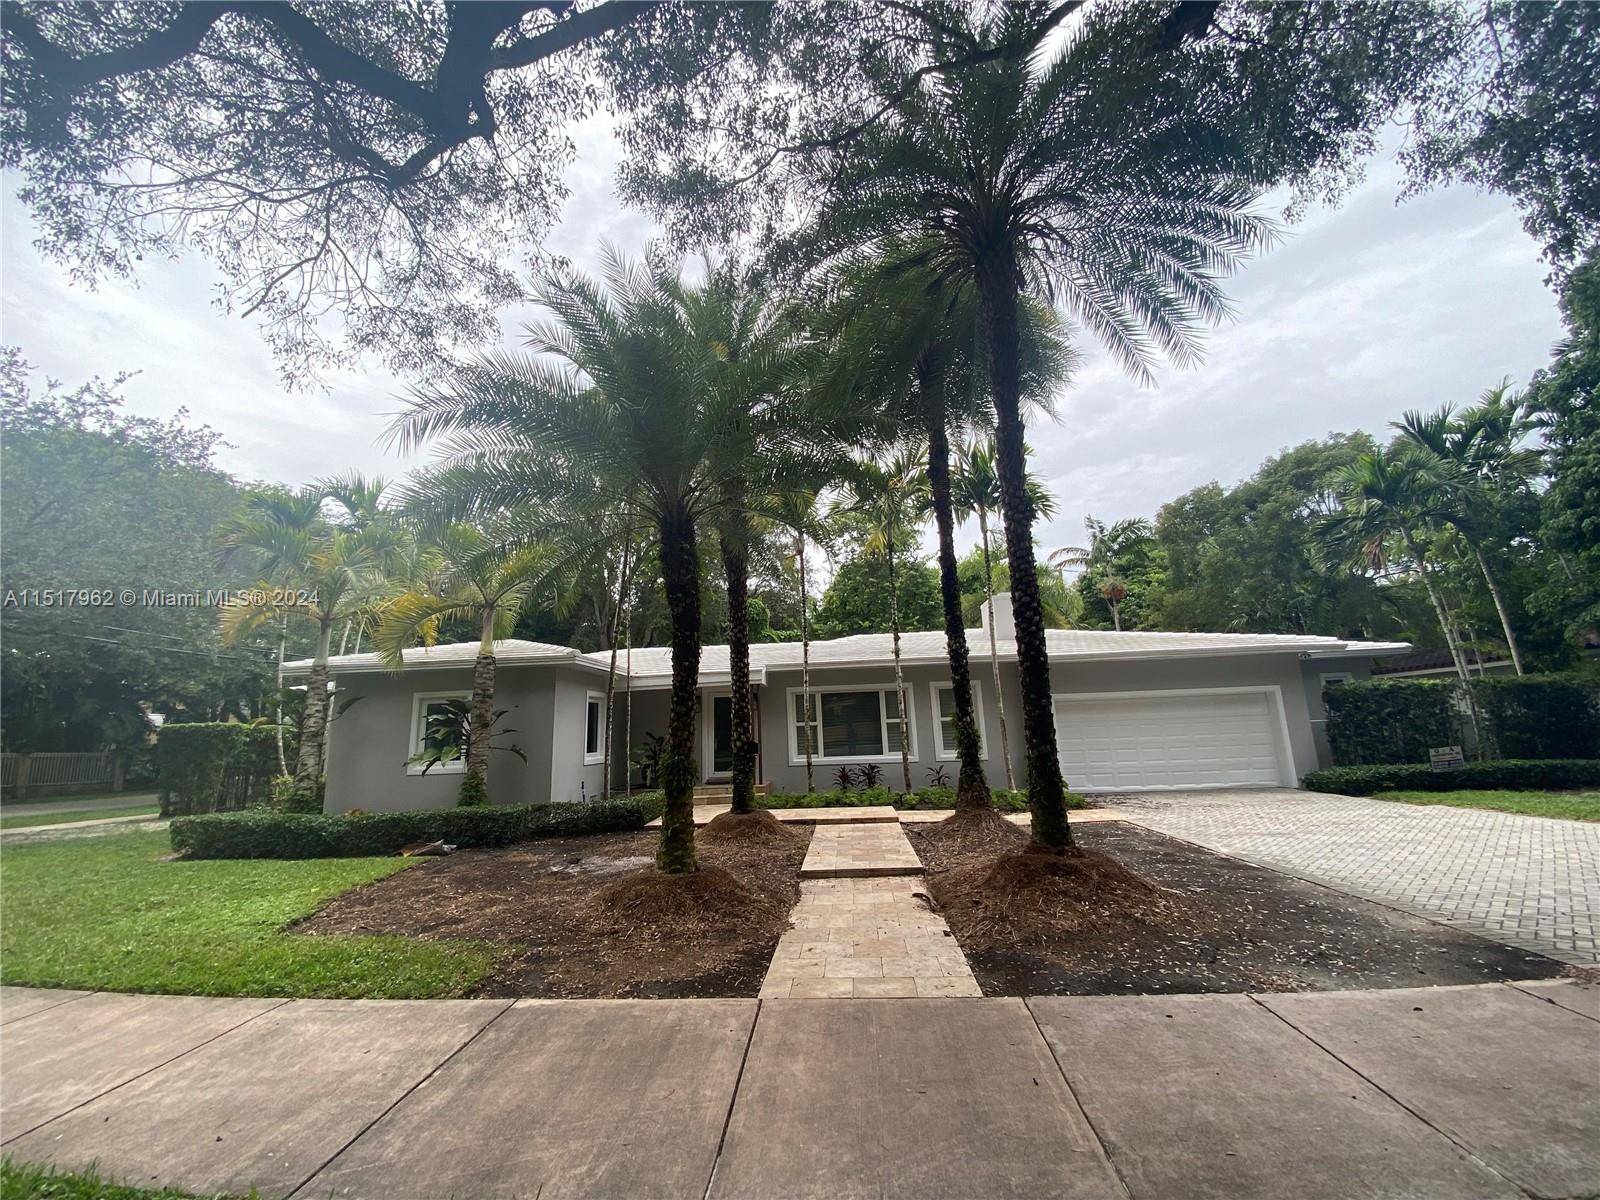 Perfectly situated in Coral Gables, this stunning 5 bedroom, 5 bathroom 1 2 half bathroom home has undergone a complete remodel 3, 880sqf.